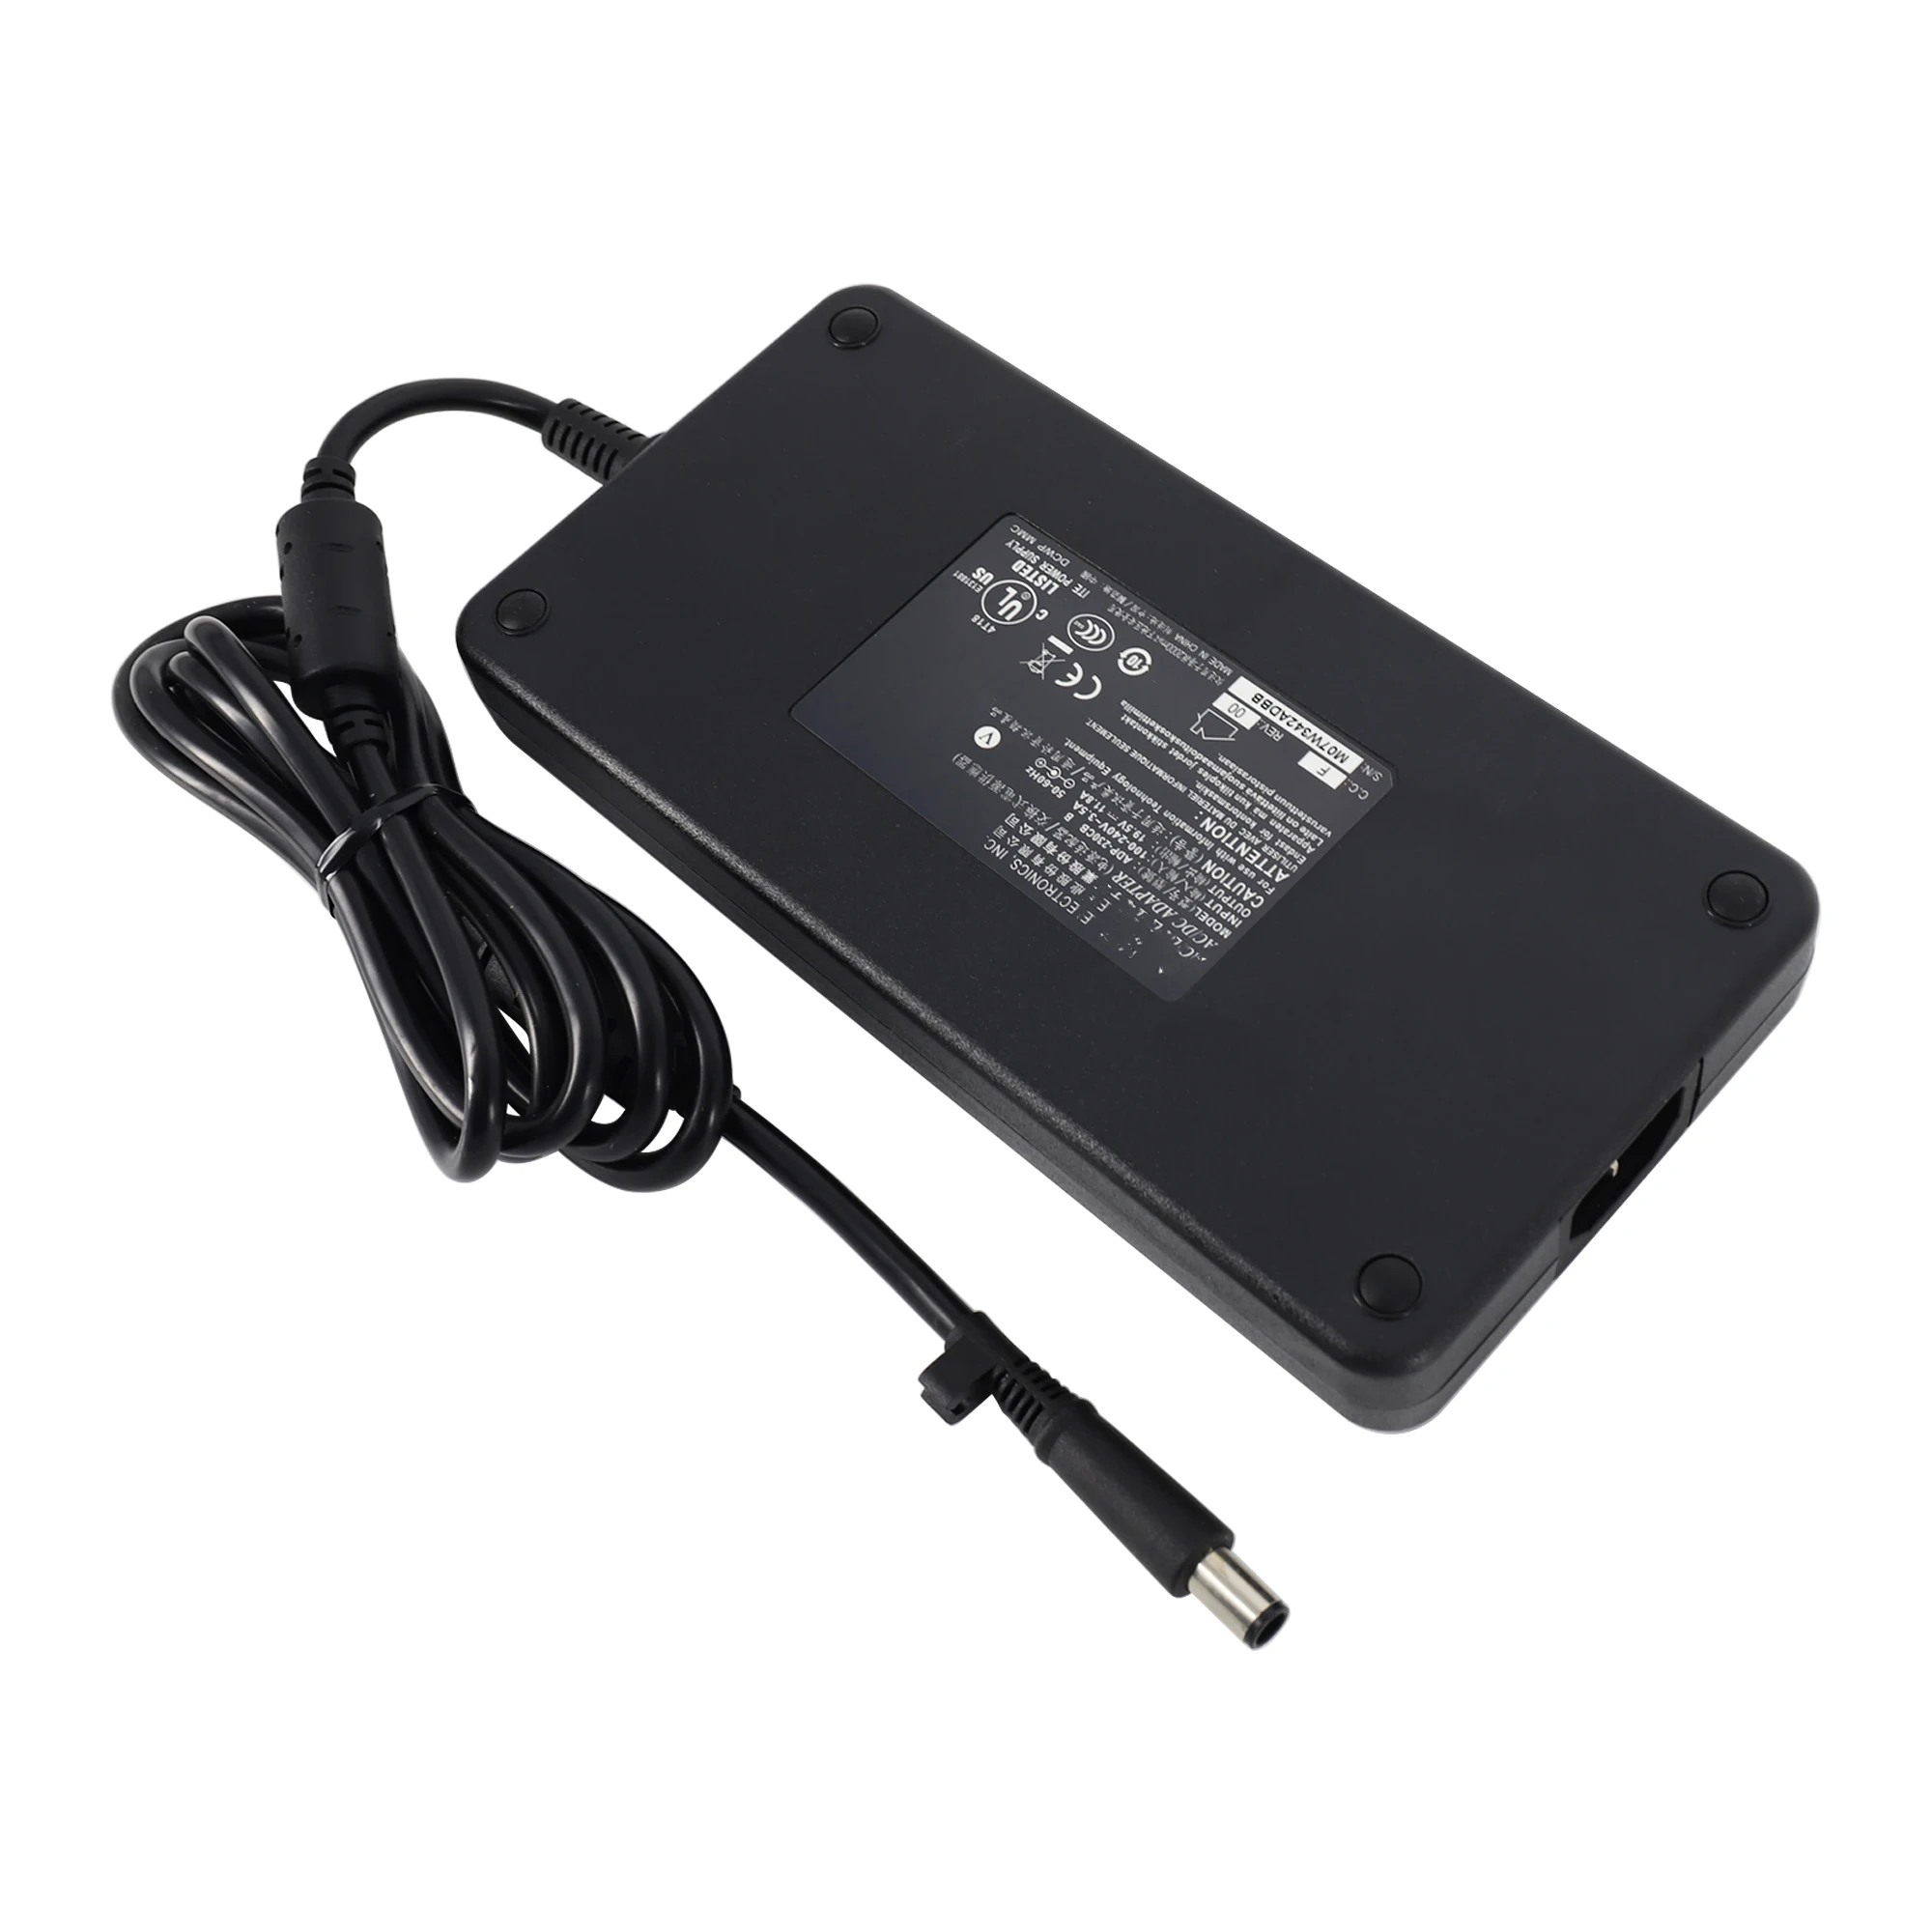 

19.5V 11.8A 230W laptop charger ac power adapter ADP-230EB T ADP-230CB B for MSI GT72 WT72 MS-1781GT80 MS-1812 gaming laptop pc